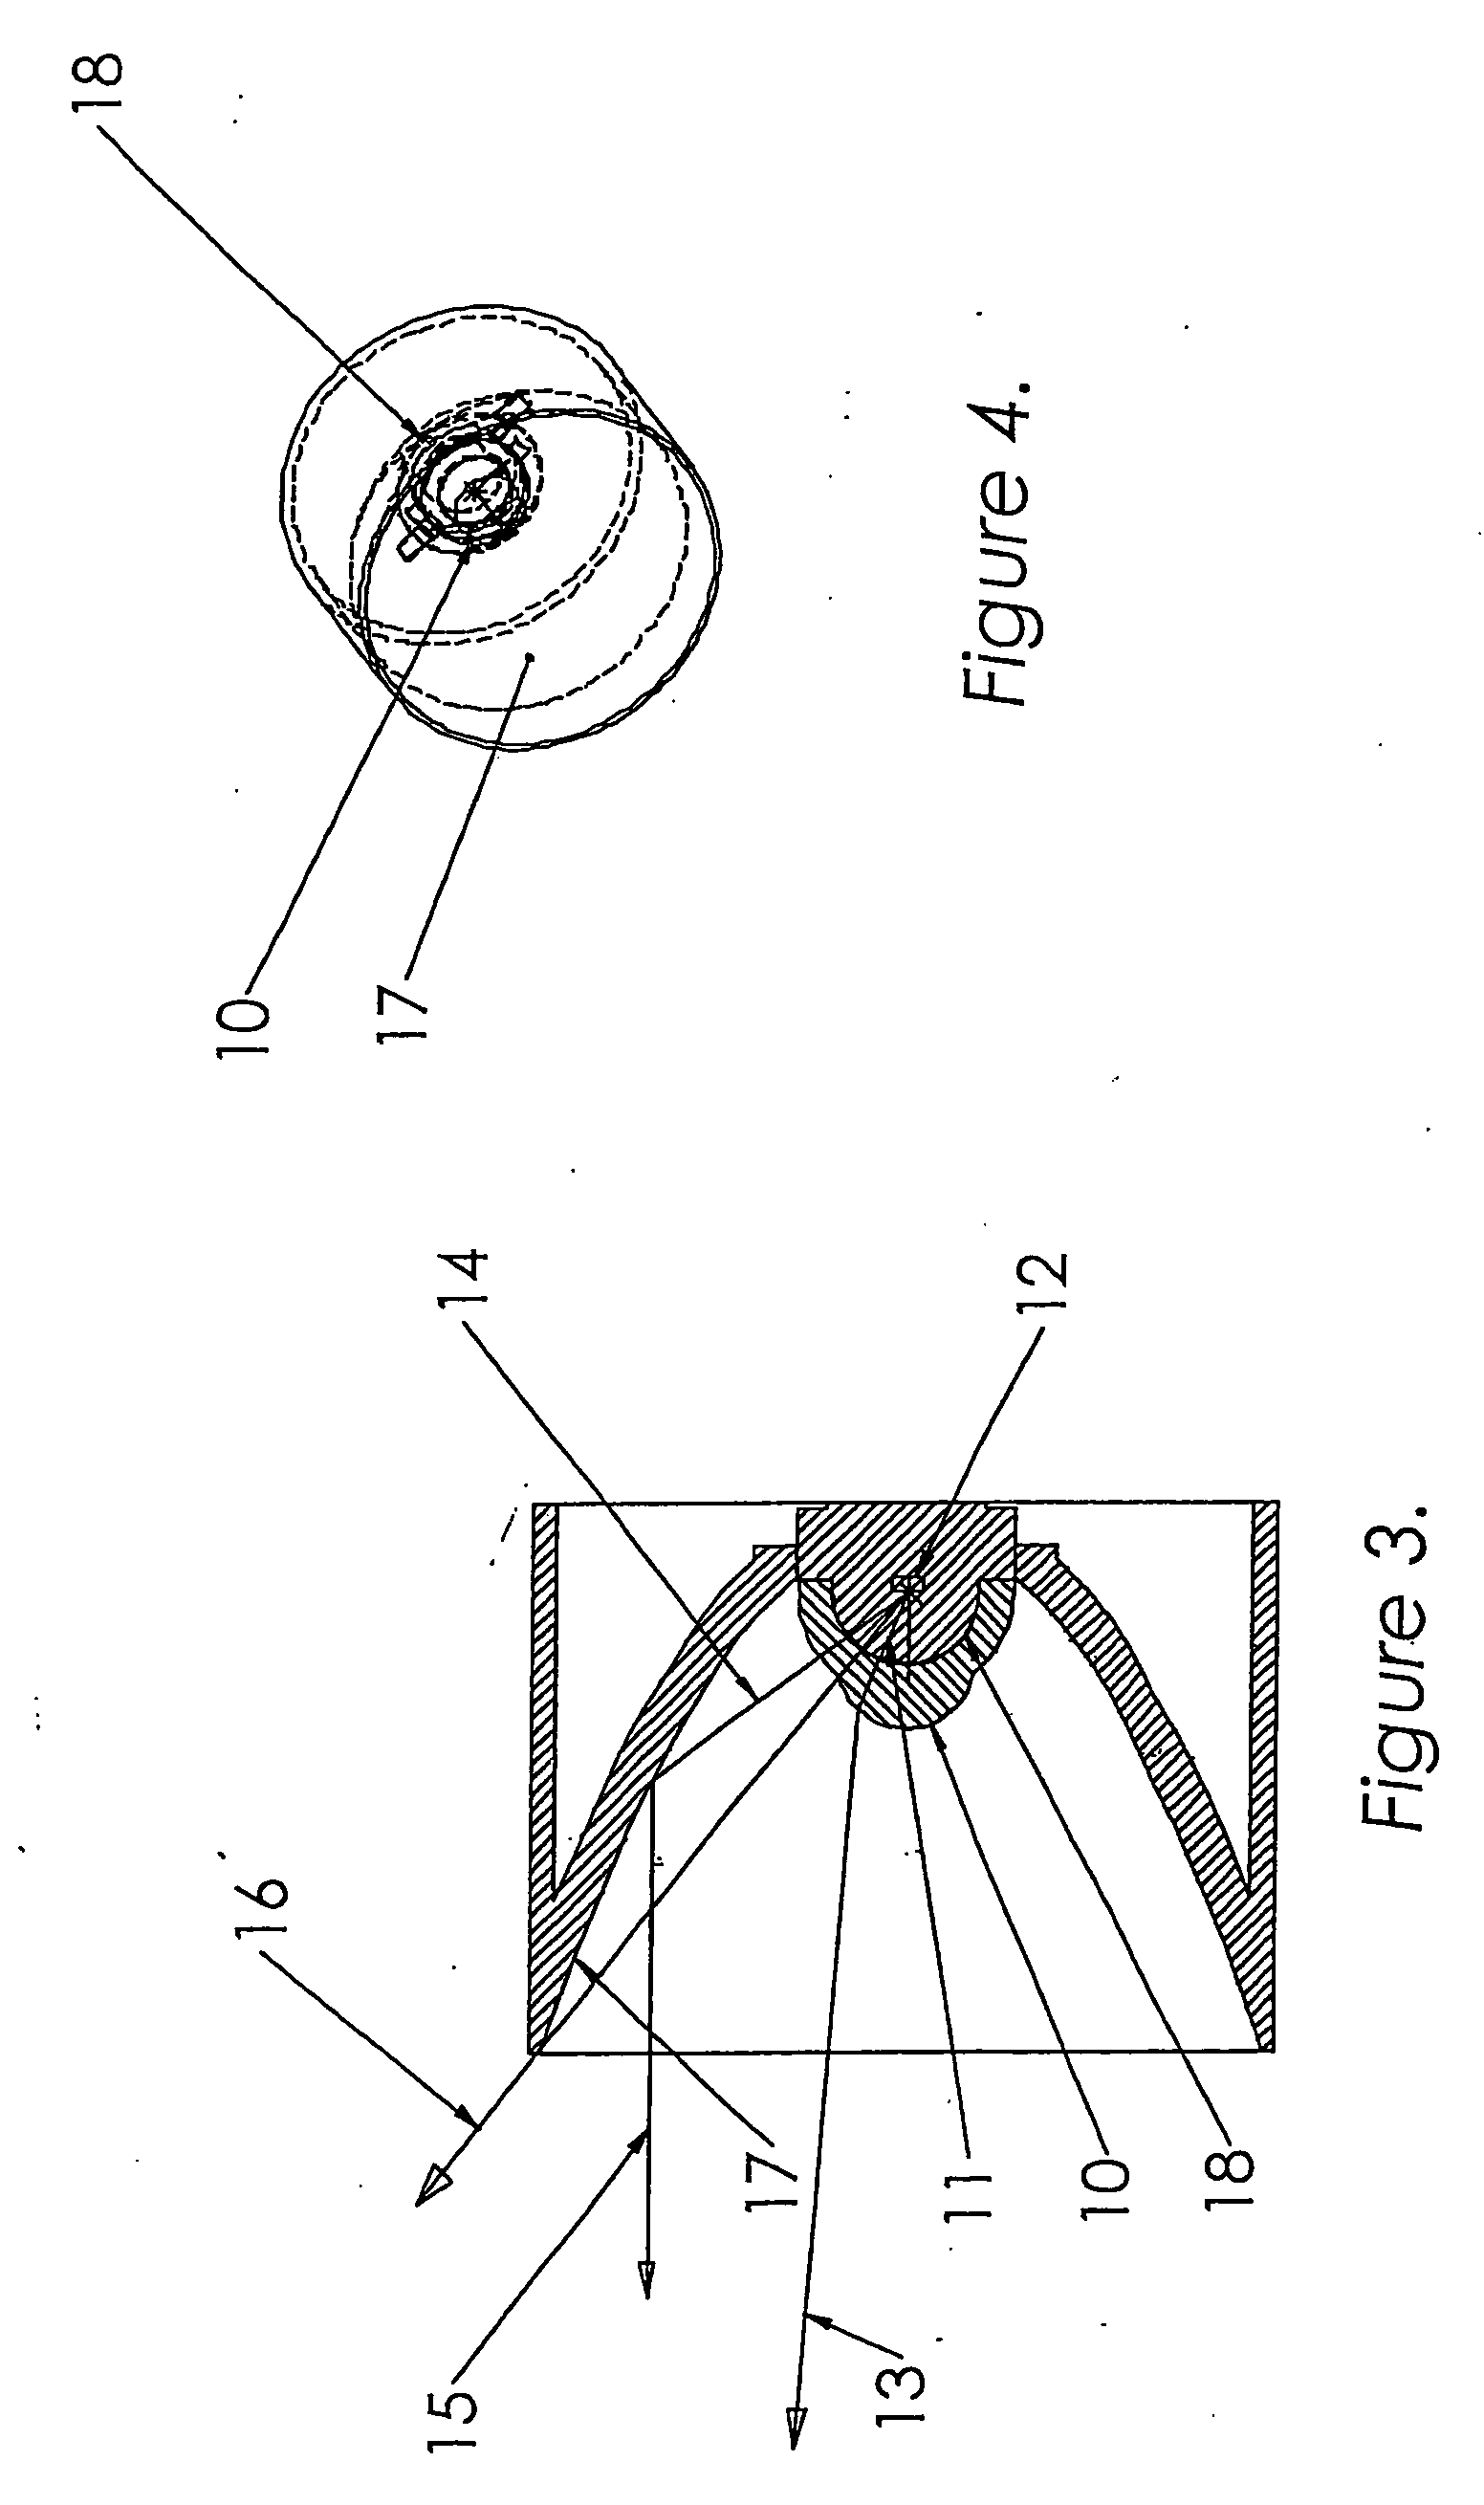 Light zoom source using light emitting diodes and an improved method of collecting the energy radiating from them